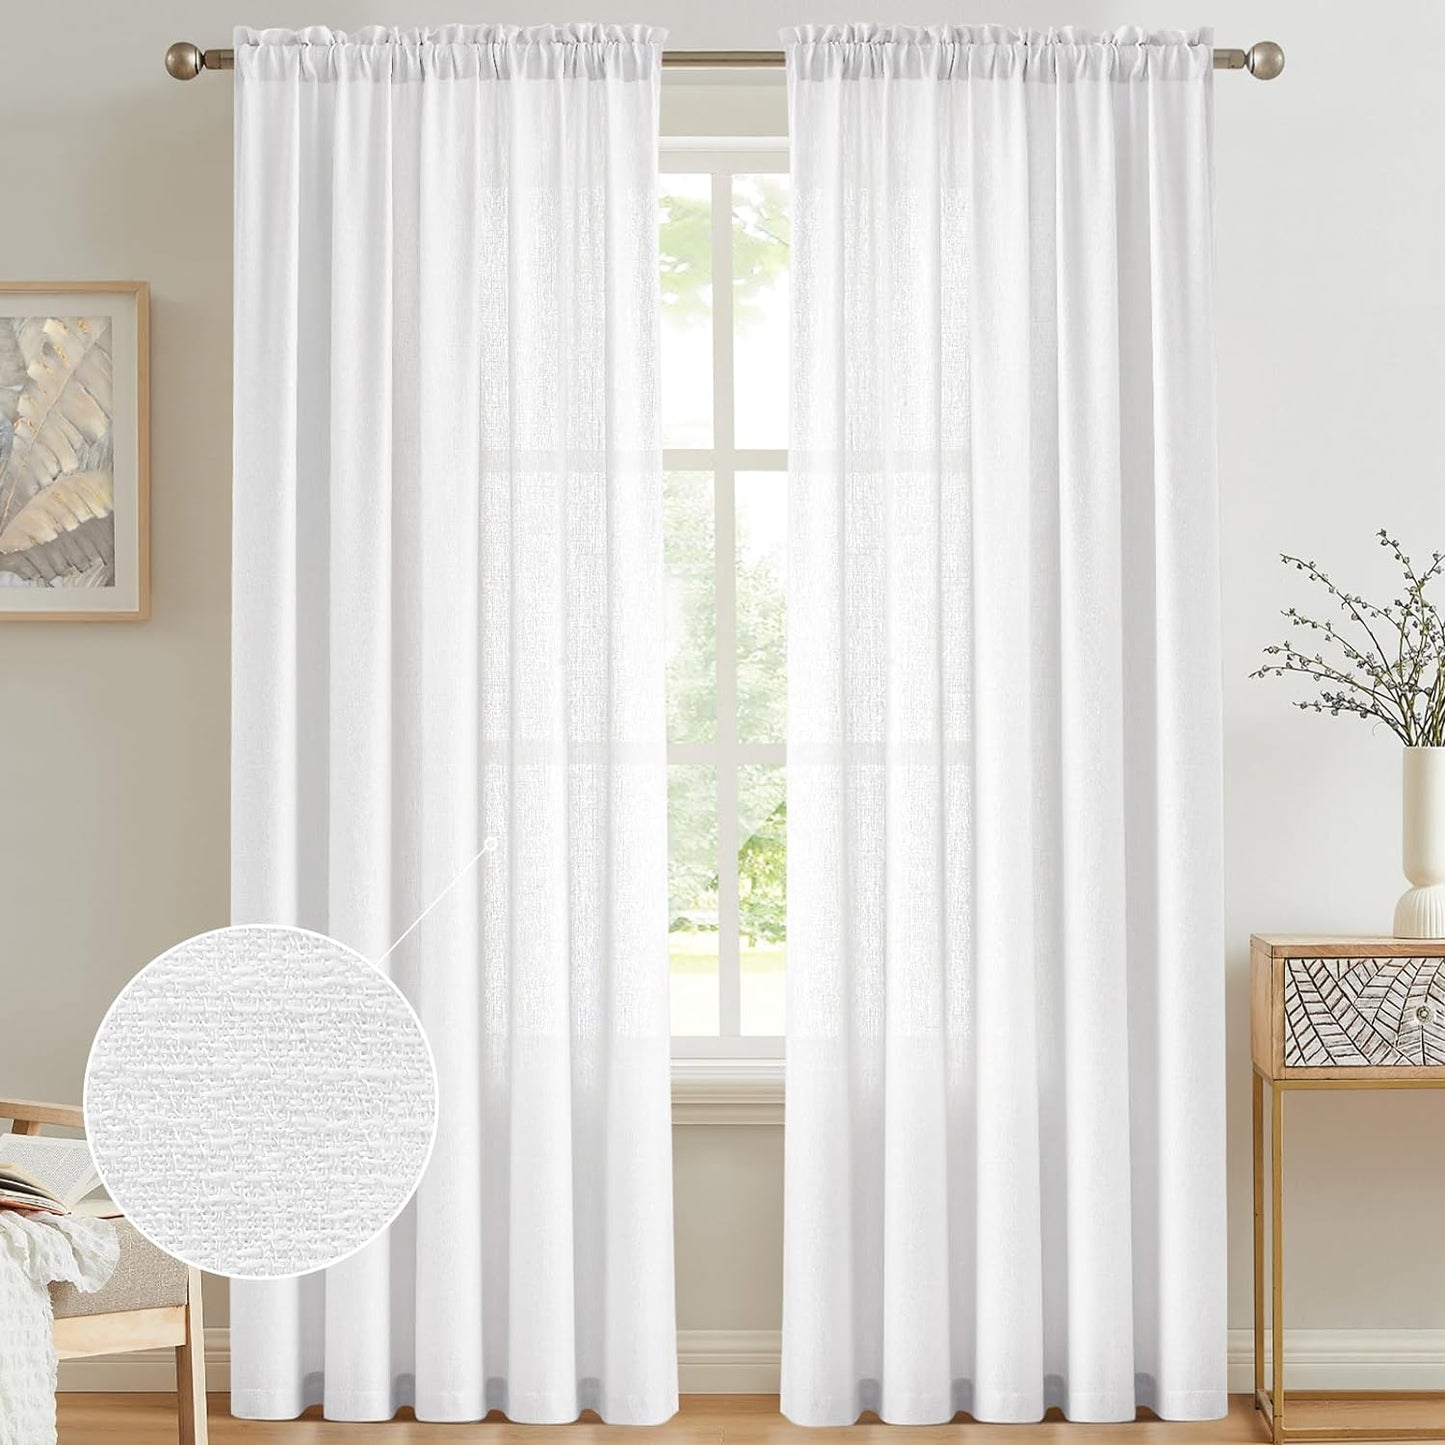 Anpark White Semi Sheer Curtains Linen Rod Pocket Curtains Tiebacks Included Semi Sheers, Privacy & Serenity for Bedroom, Soft Light for Relaxation - 52" W X 84" L, 2 Panels  Anpark White 52X96 Inch 